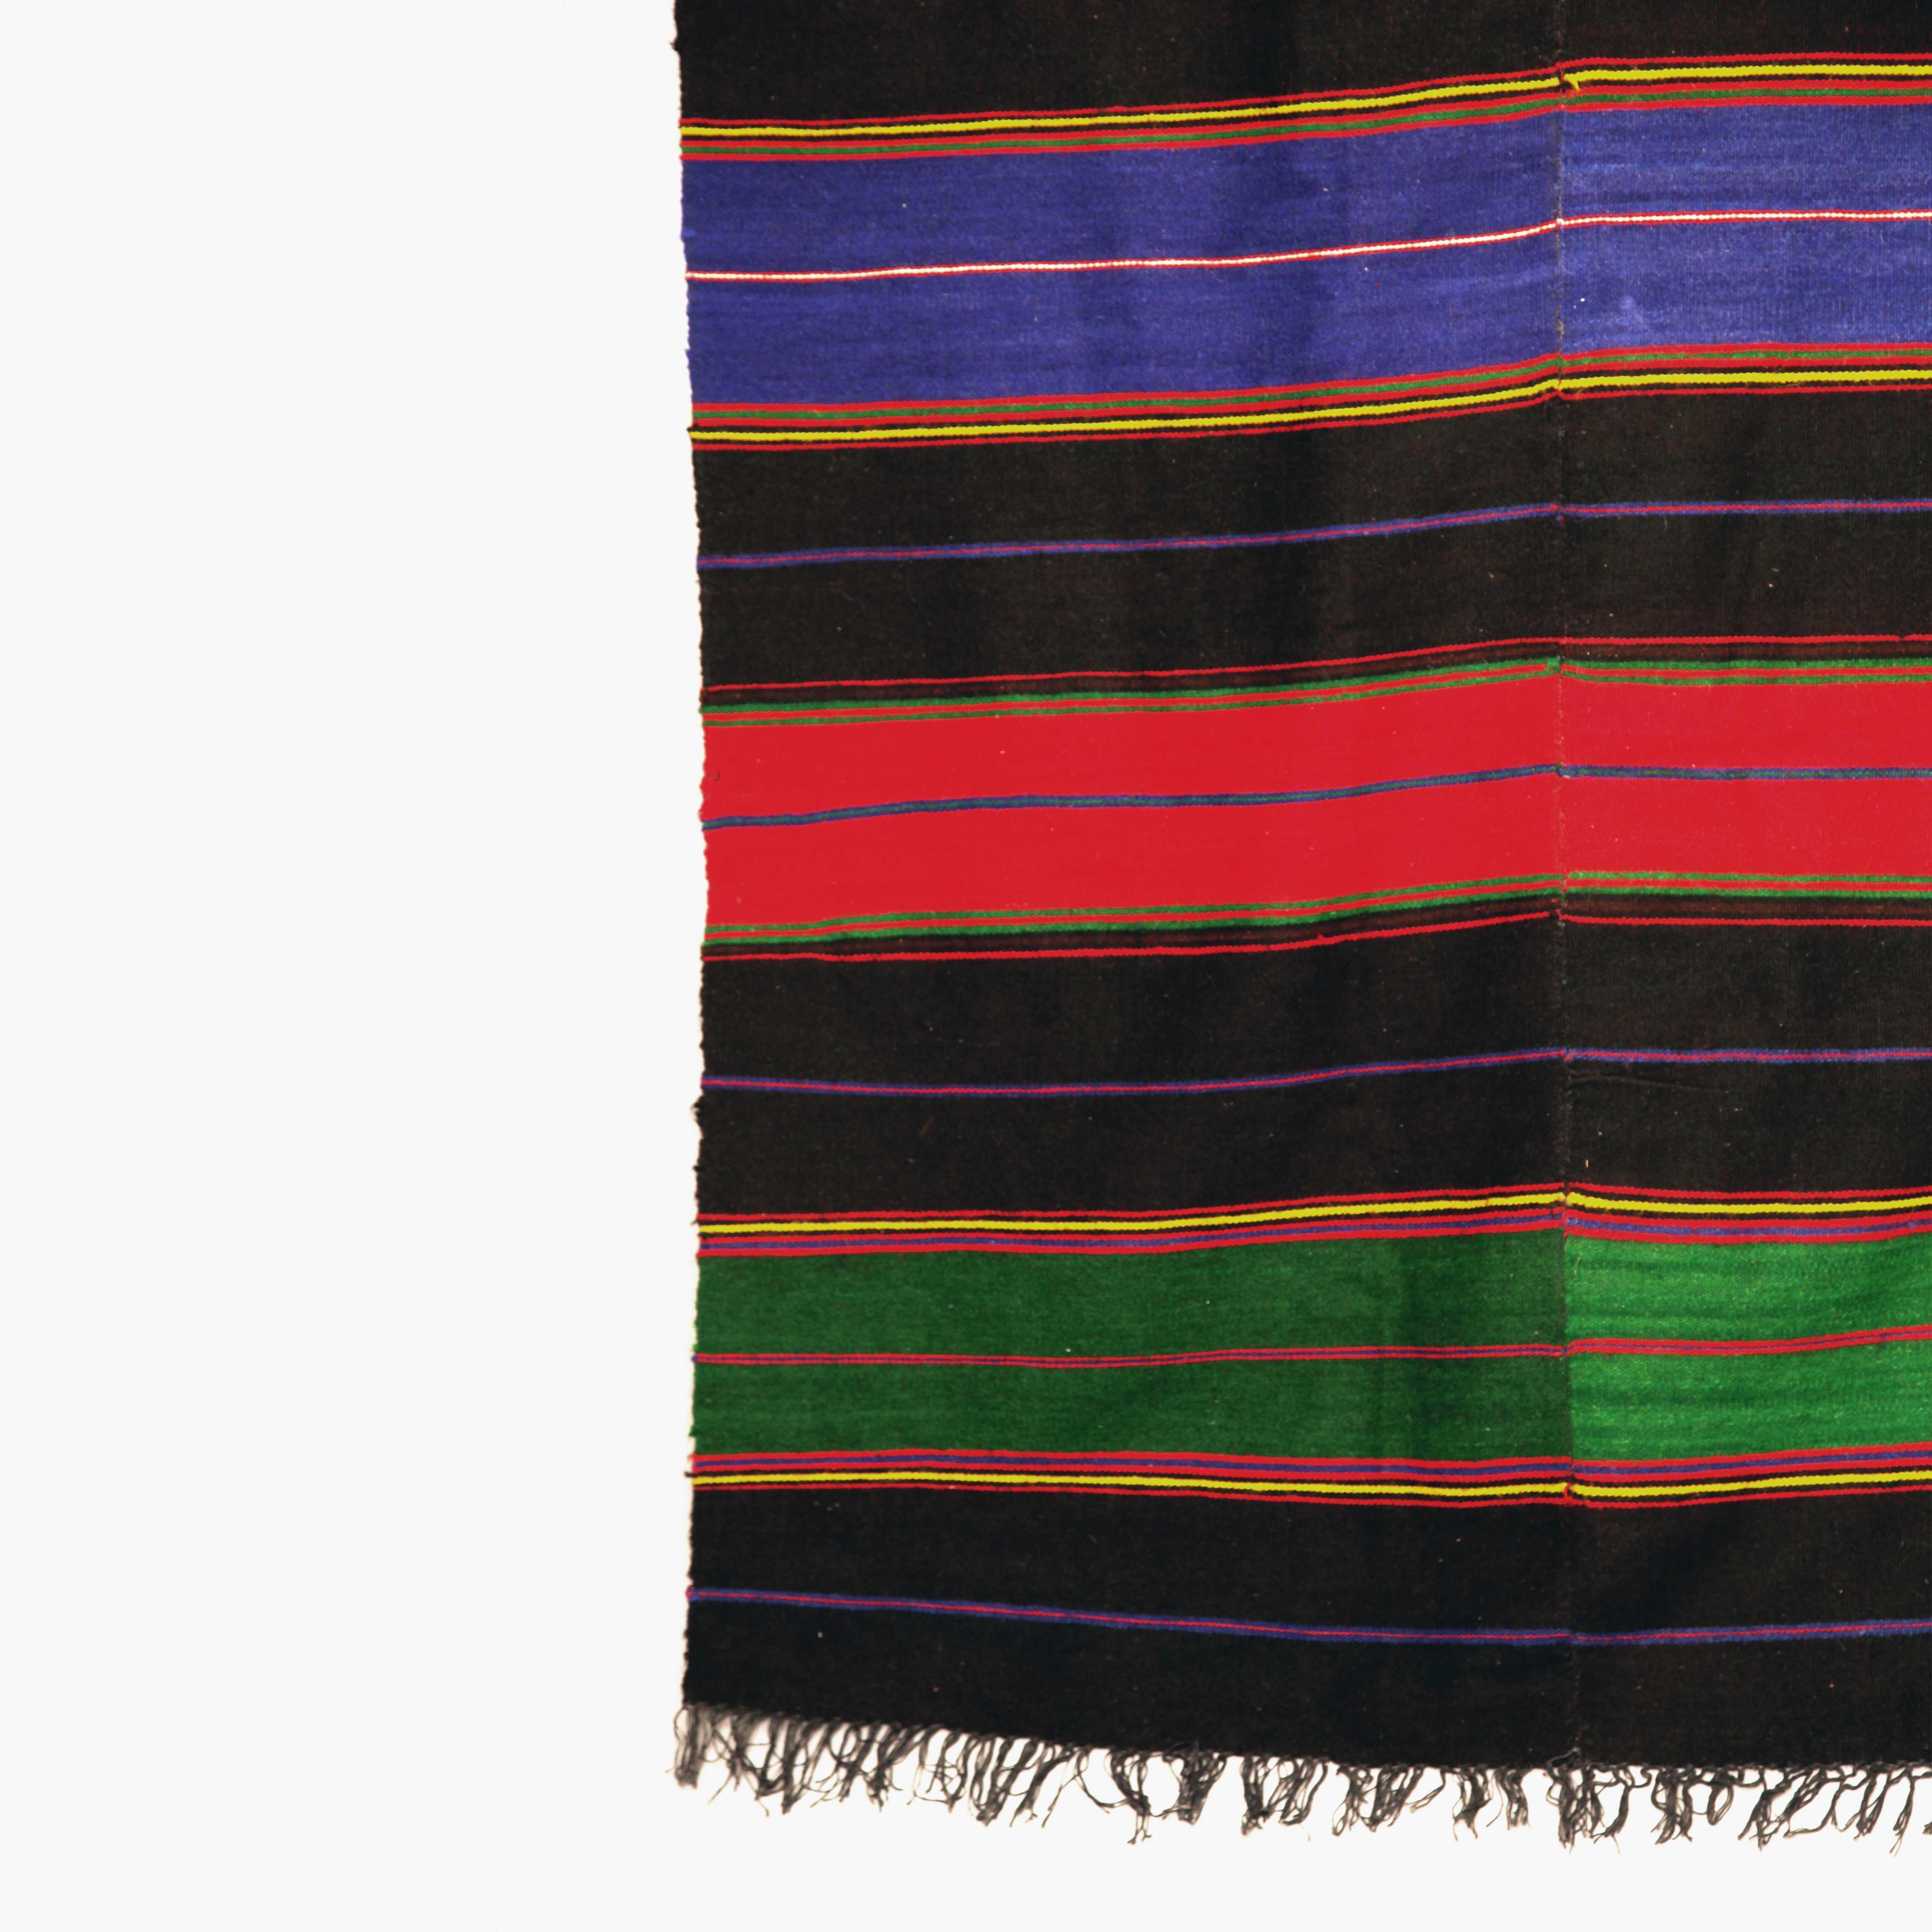 Extra large handmade wool rug in black, green, red and blue stripes. The yarn sourced traditionally and hand-dyed organically. Imported from Greece and more specifically from the mountainous Taksiyarhi village which was famous for its handmade rug